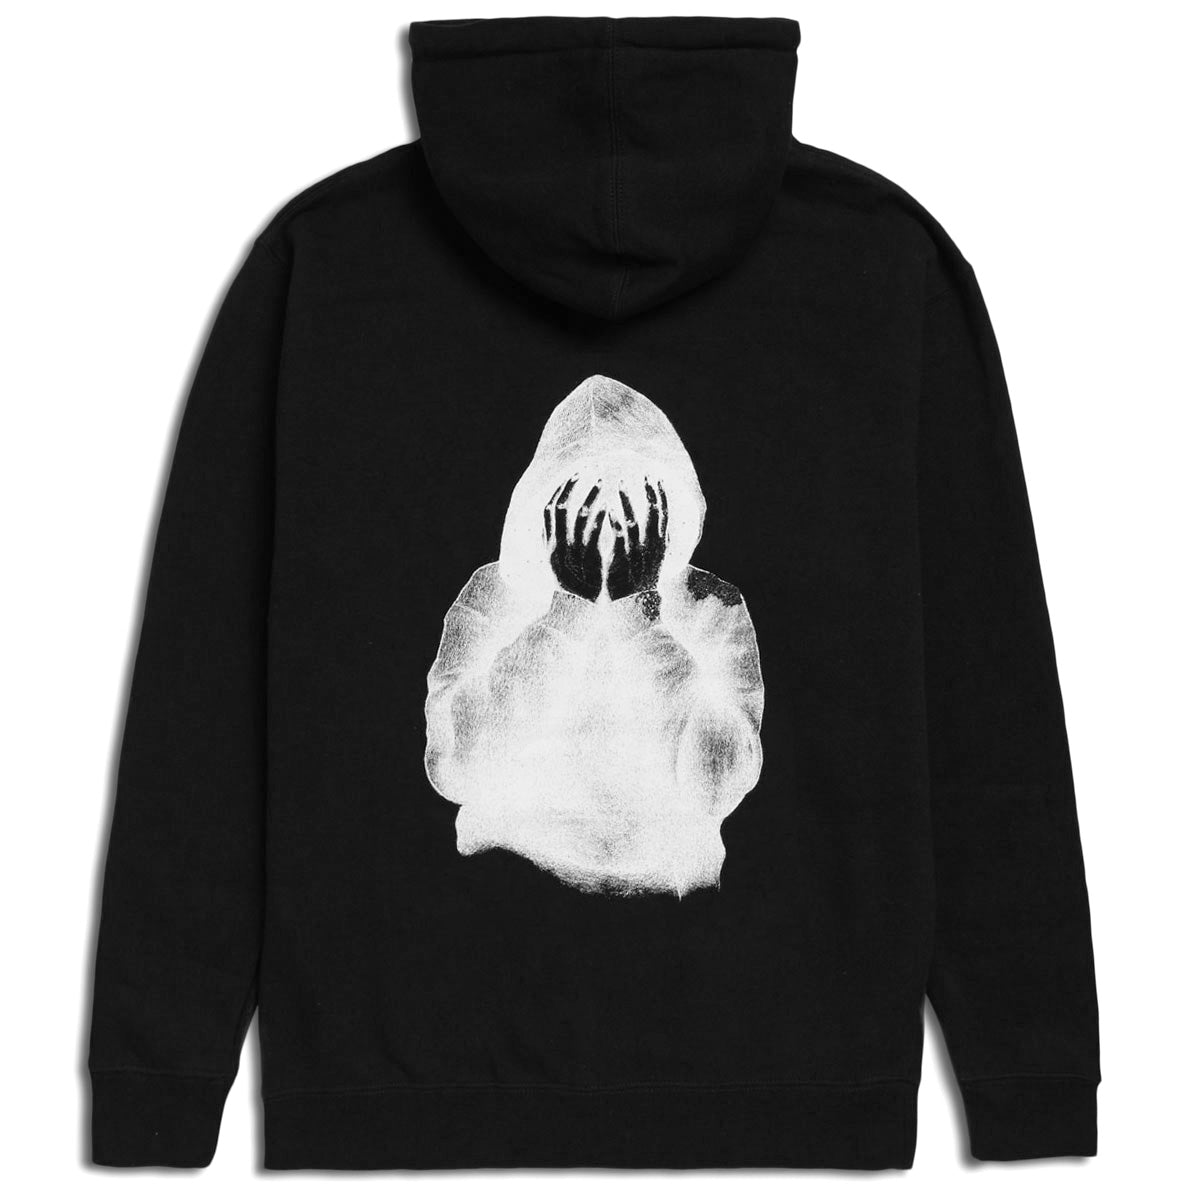 CCS Smile on the Surface Zip Hoodie - Black/White image 2